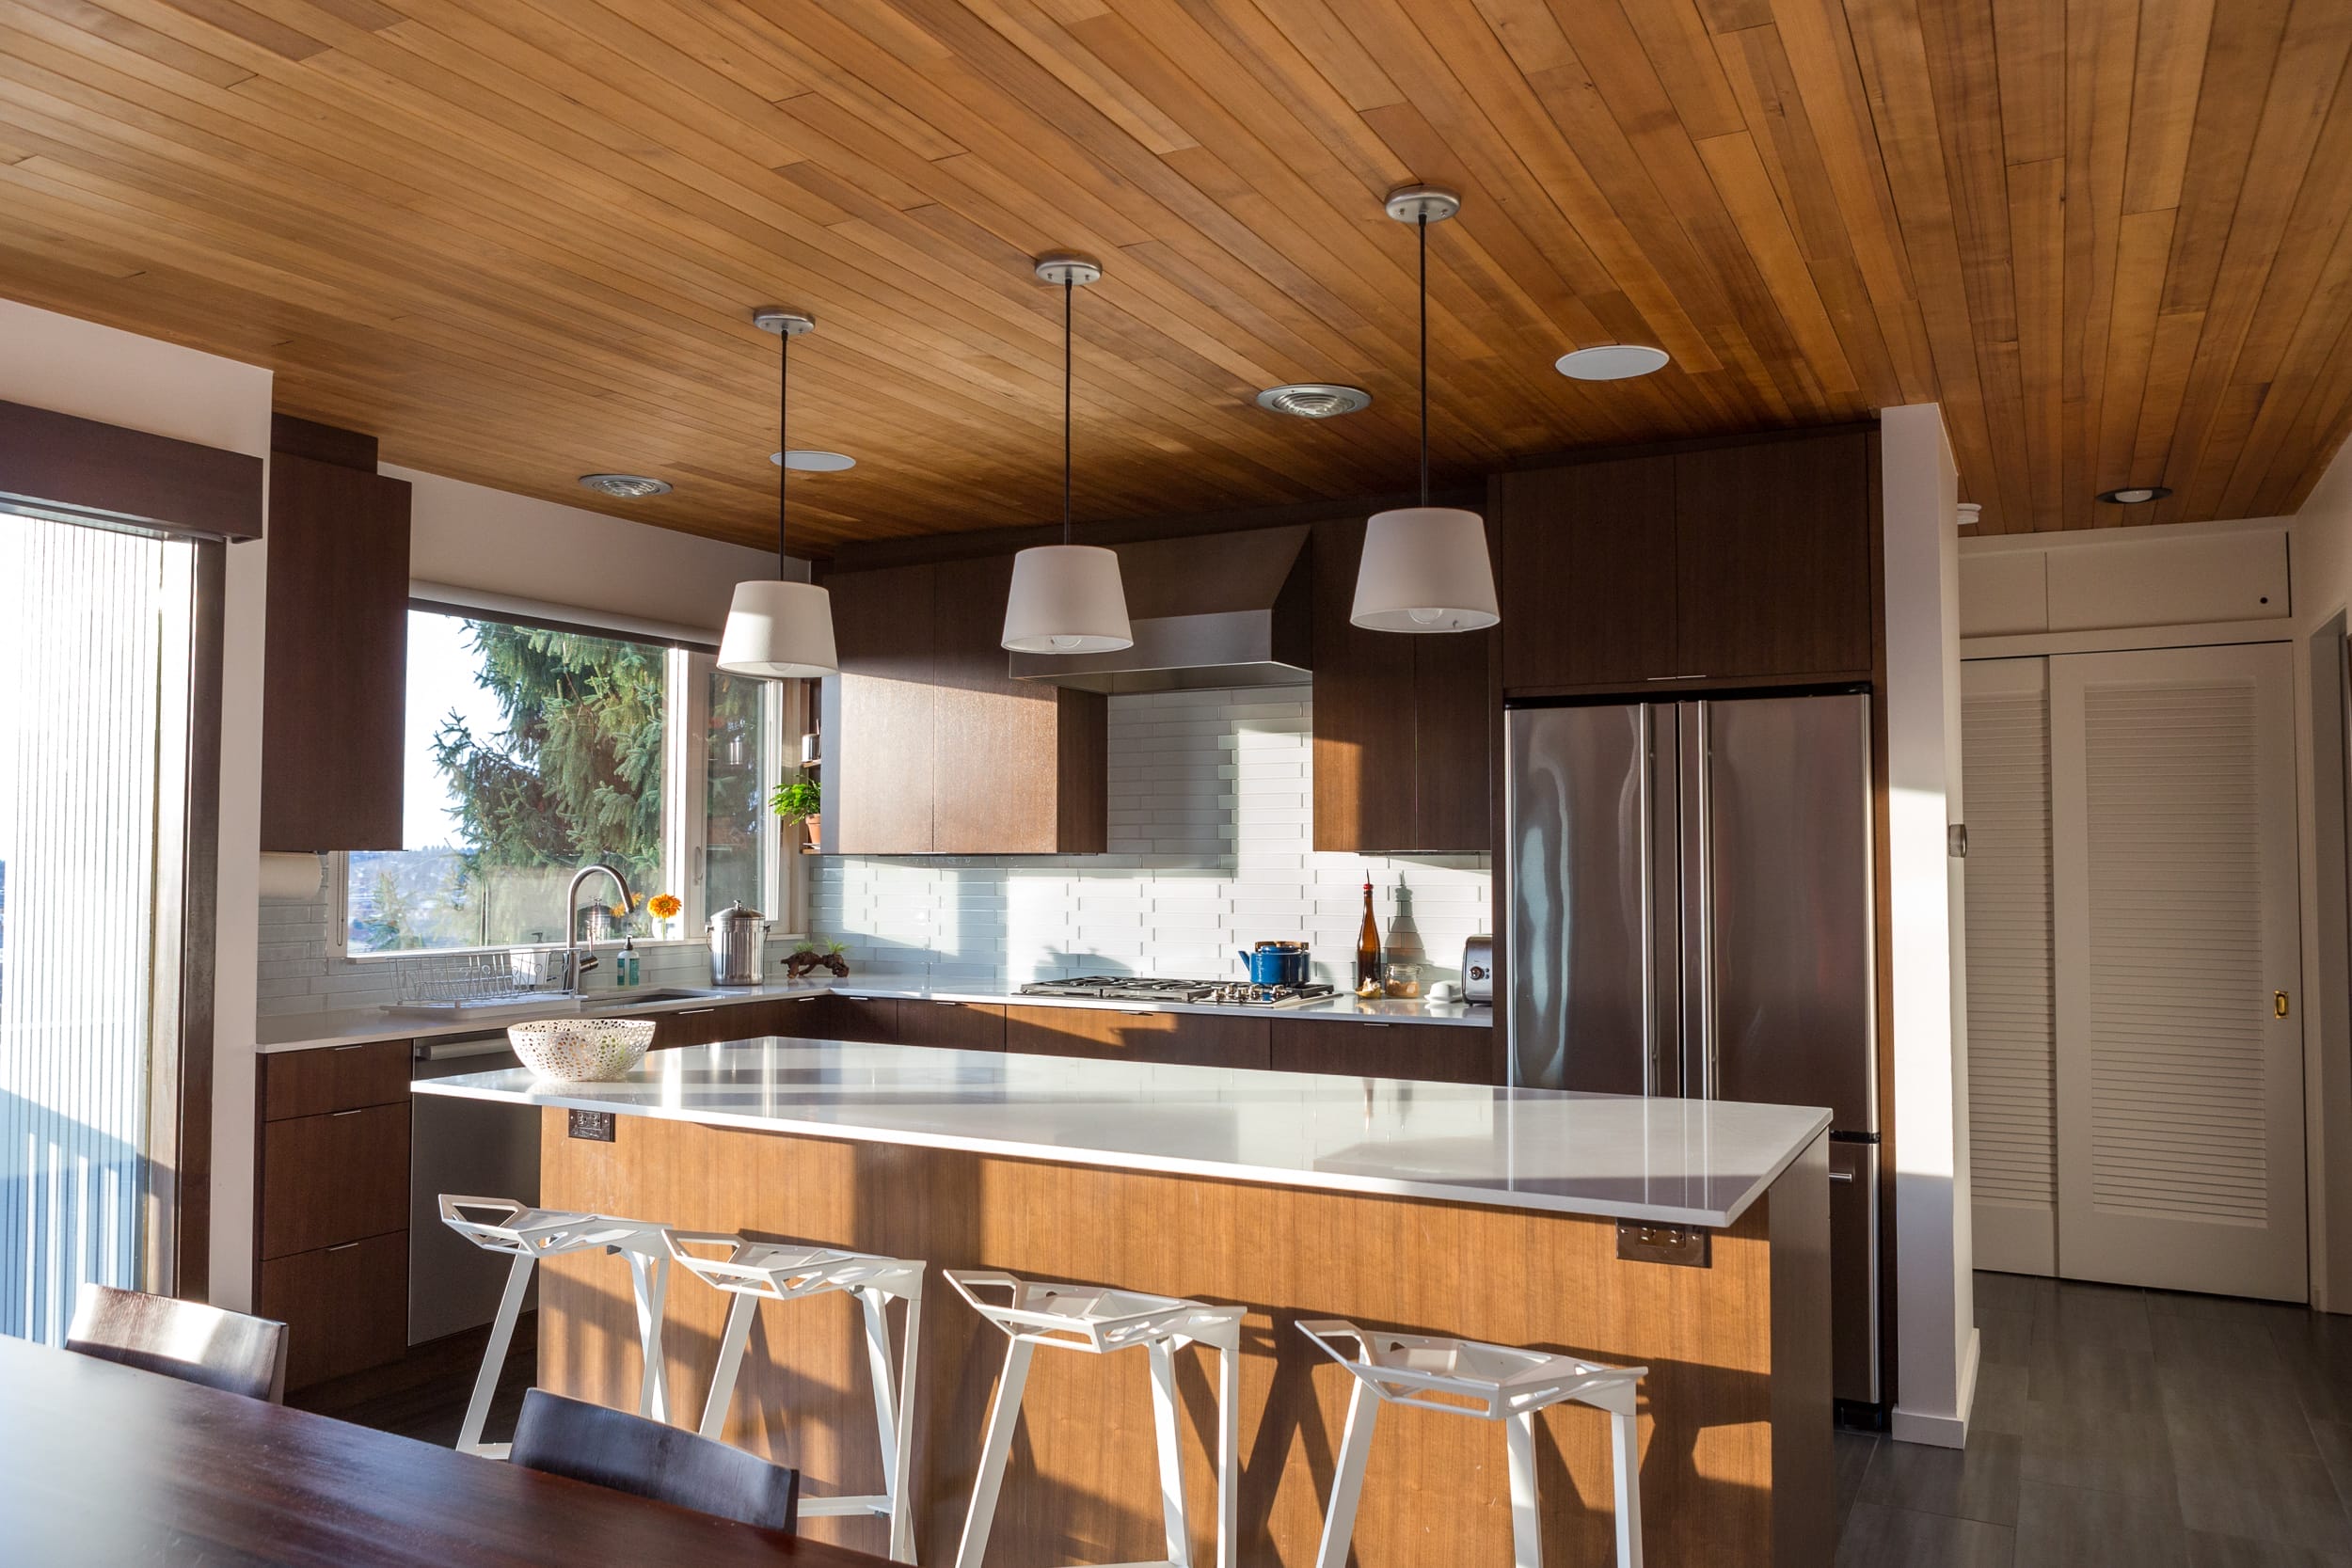 A modern kitchen with a wooden ceiling.